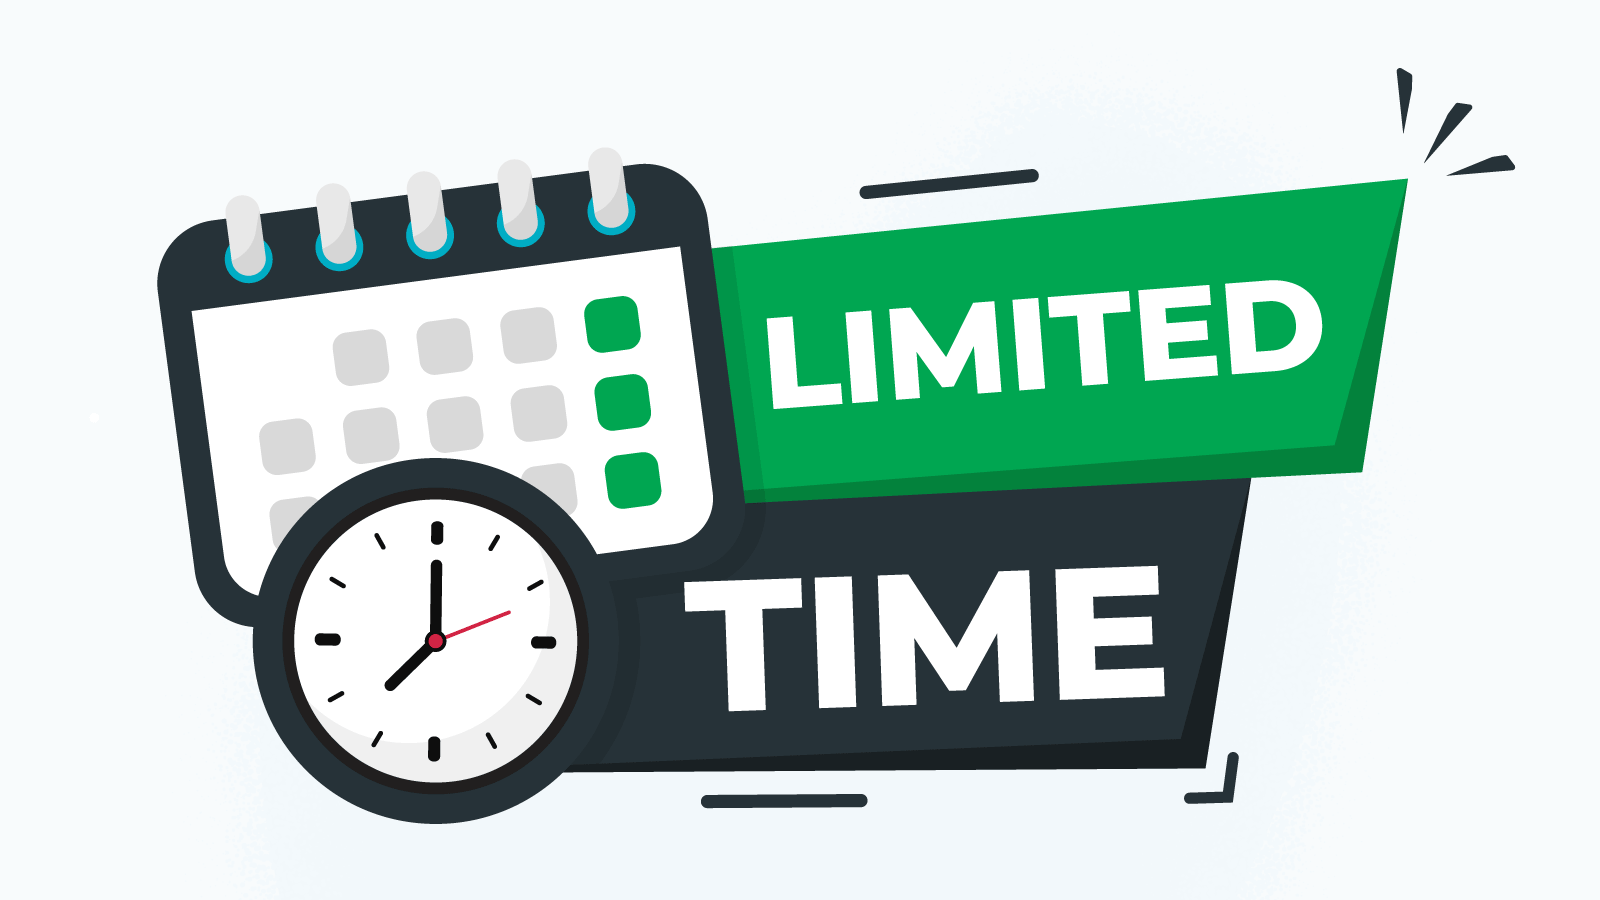 Availability & time limits